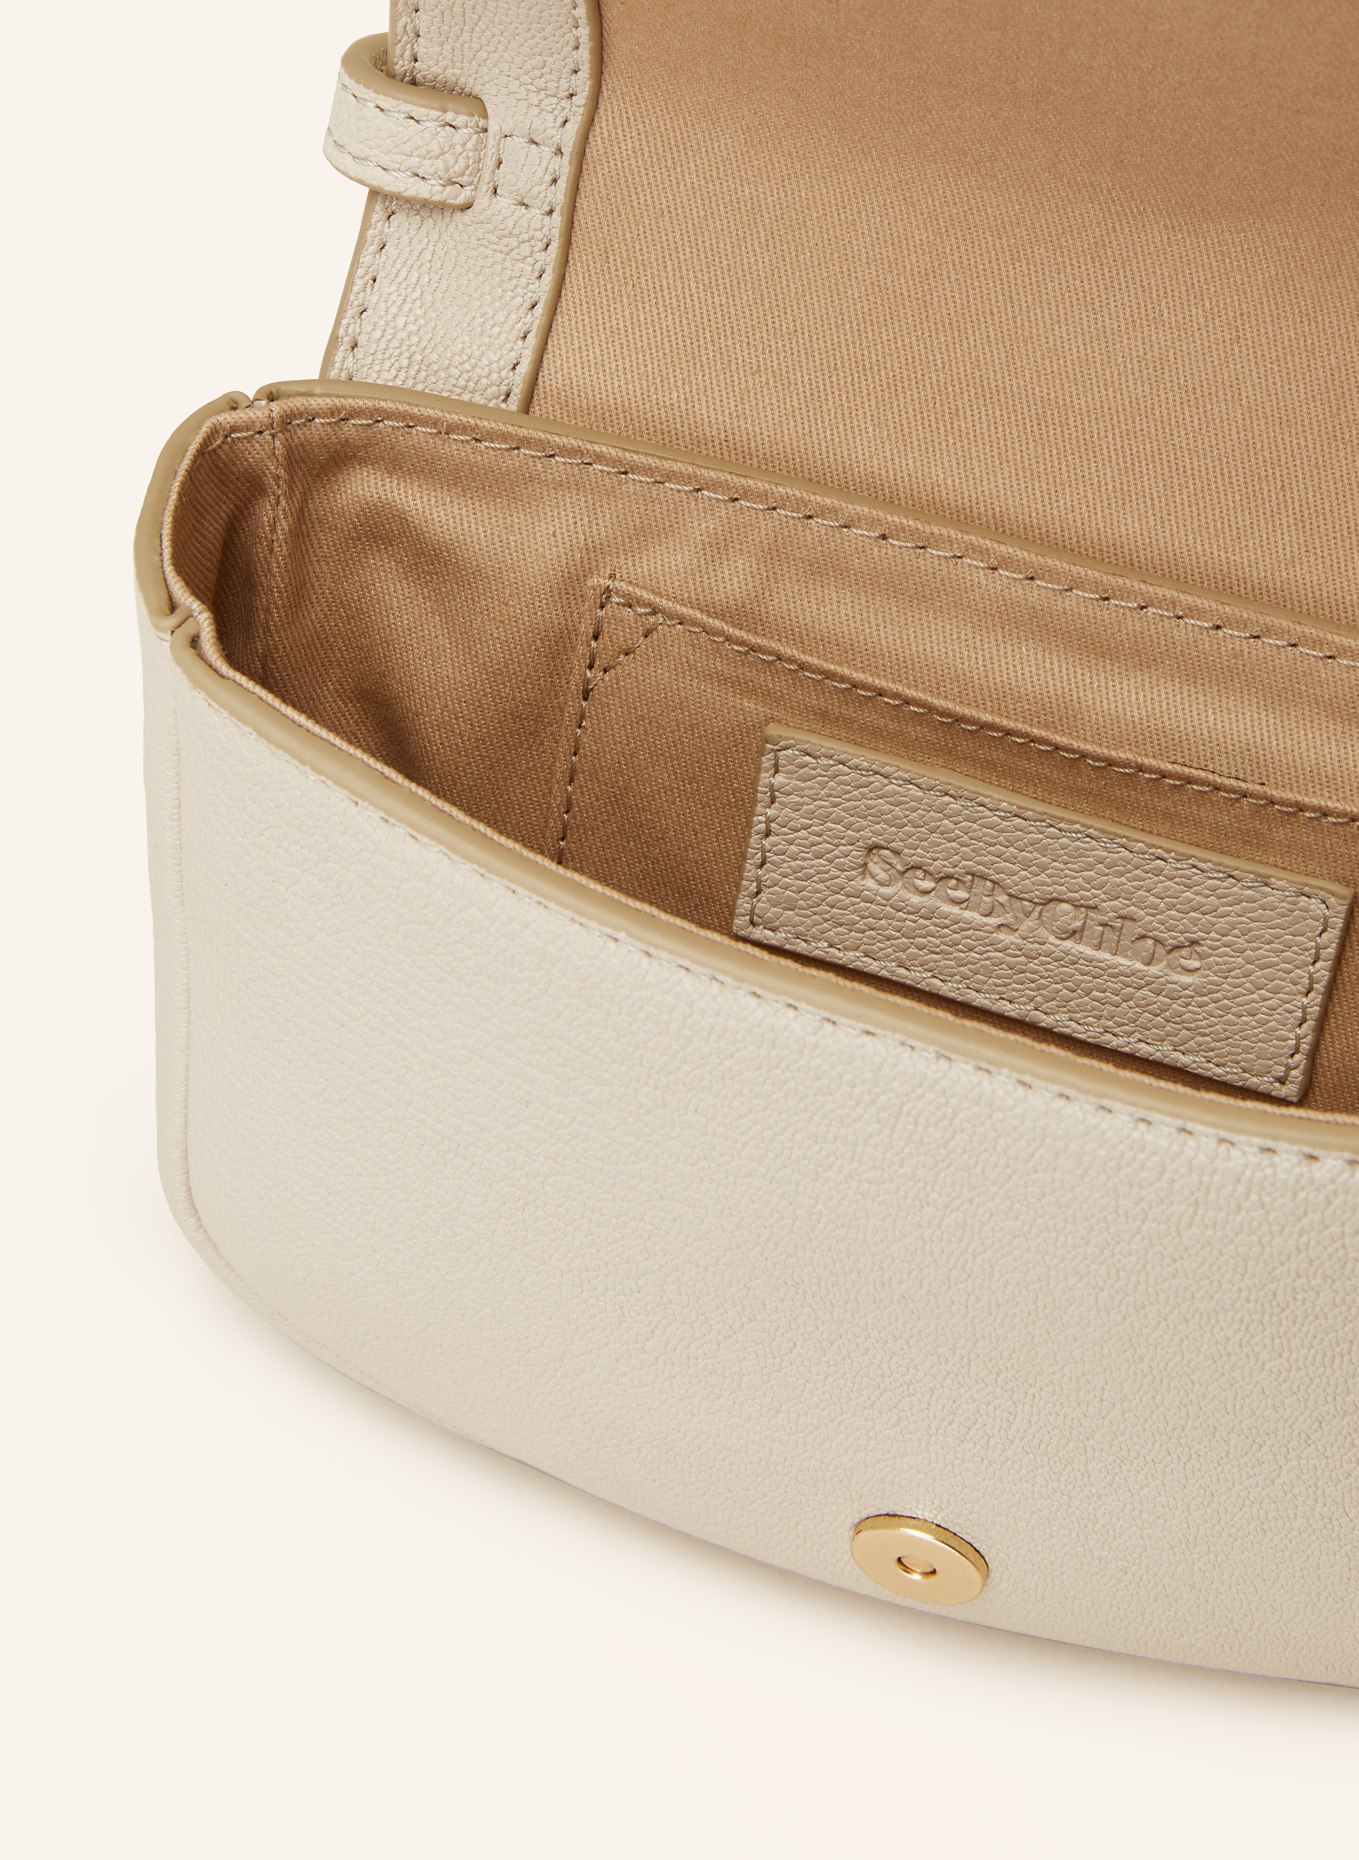 SEE BY CHLOÉ Crossbody bag HANA, Color: 24H CEMENT BEIGE (Image 3)